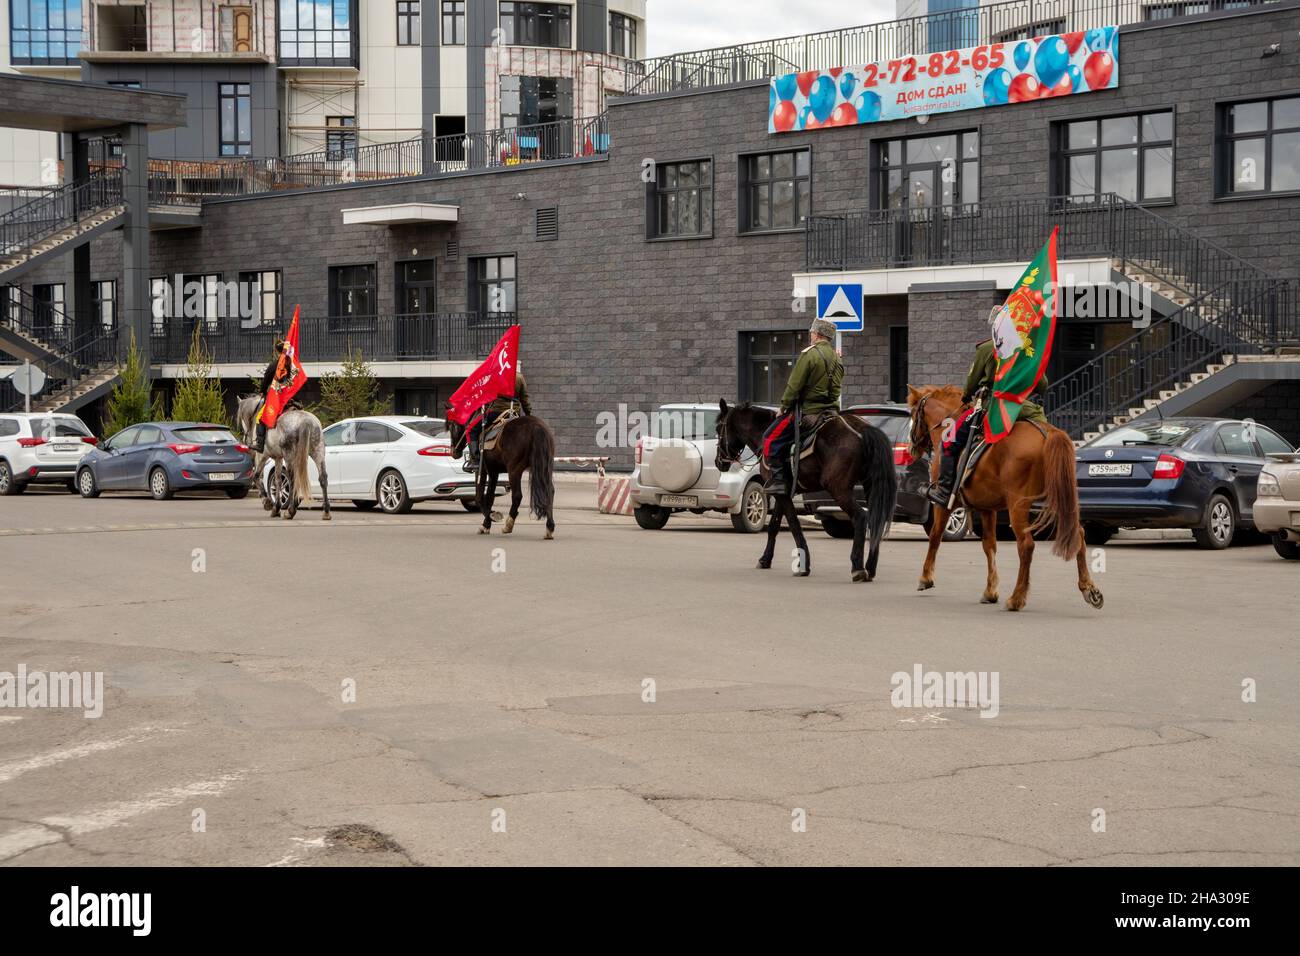 Four Cossacks with flags in their hands ride horses past parked cars in the courtyard of a residential building in the spring city. Stock Photo